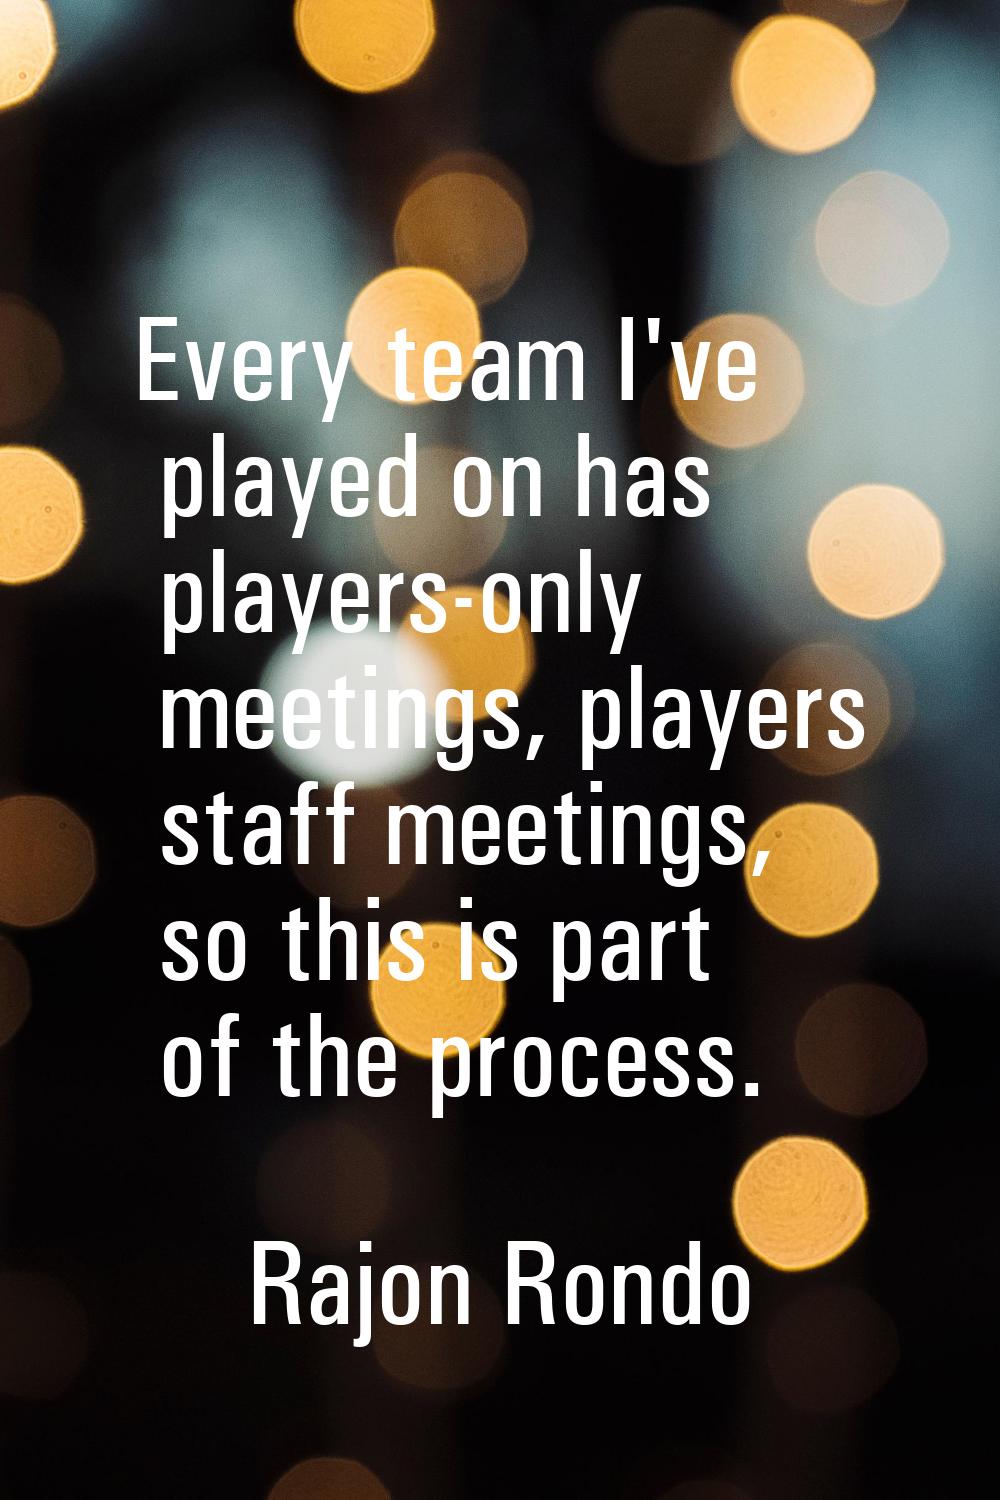 Every team I've played on has players-only meetings, players staff meetings, so this is part of the